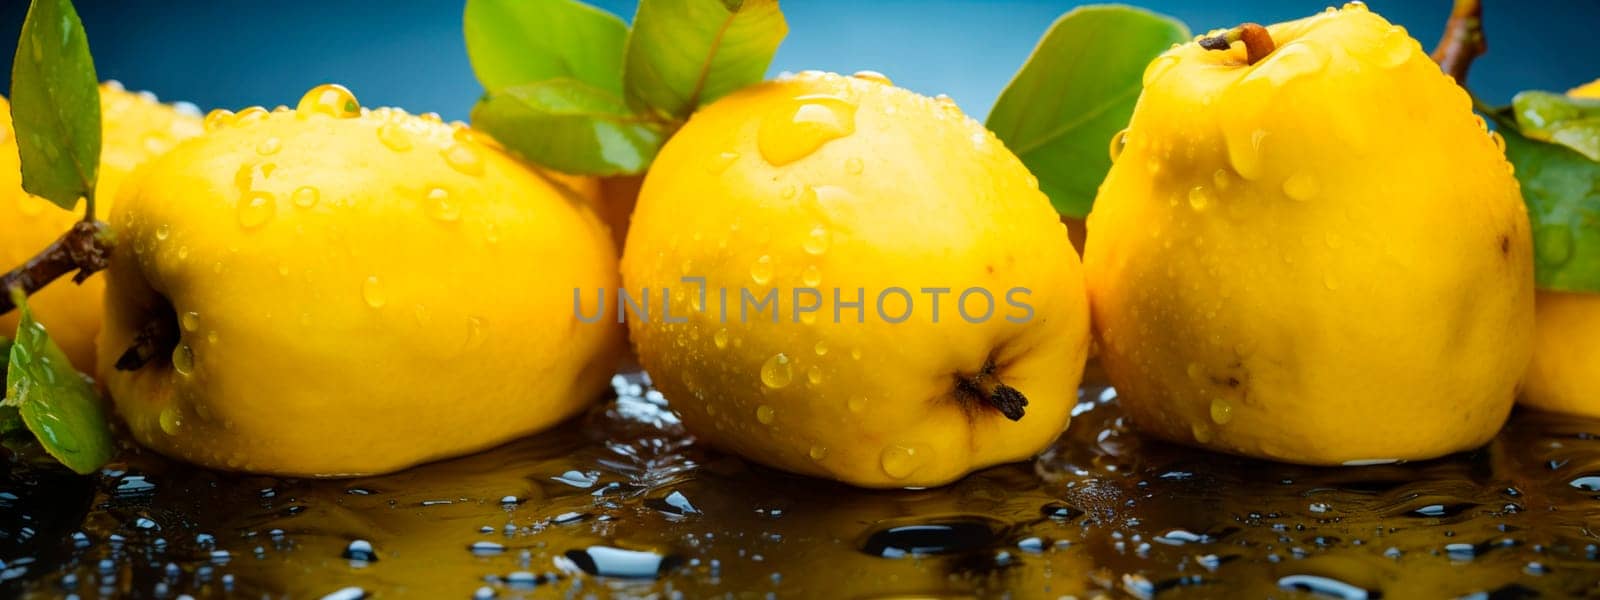 There are a lot of wet quince fruits. Selective focus. by yanadjana